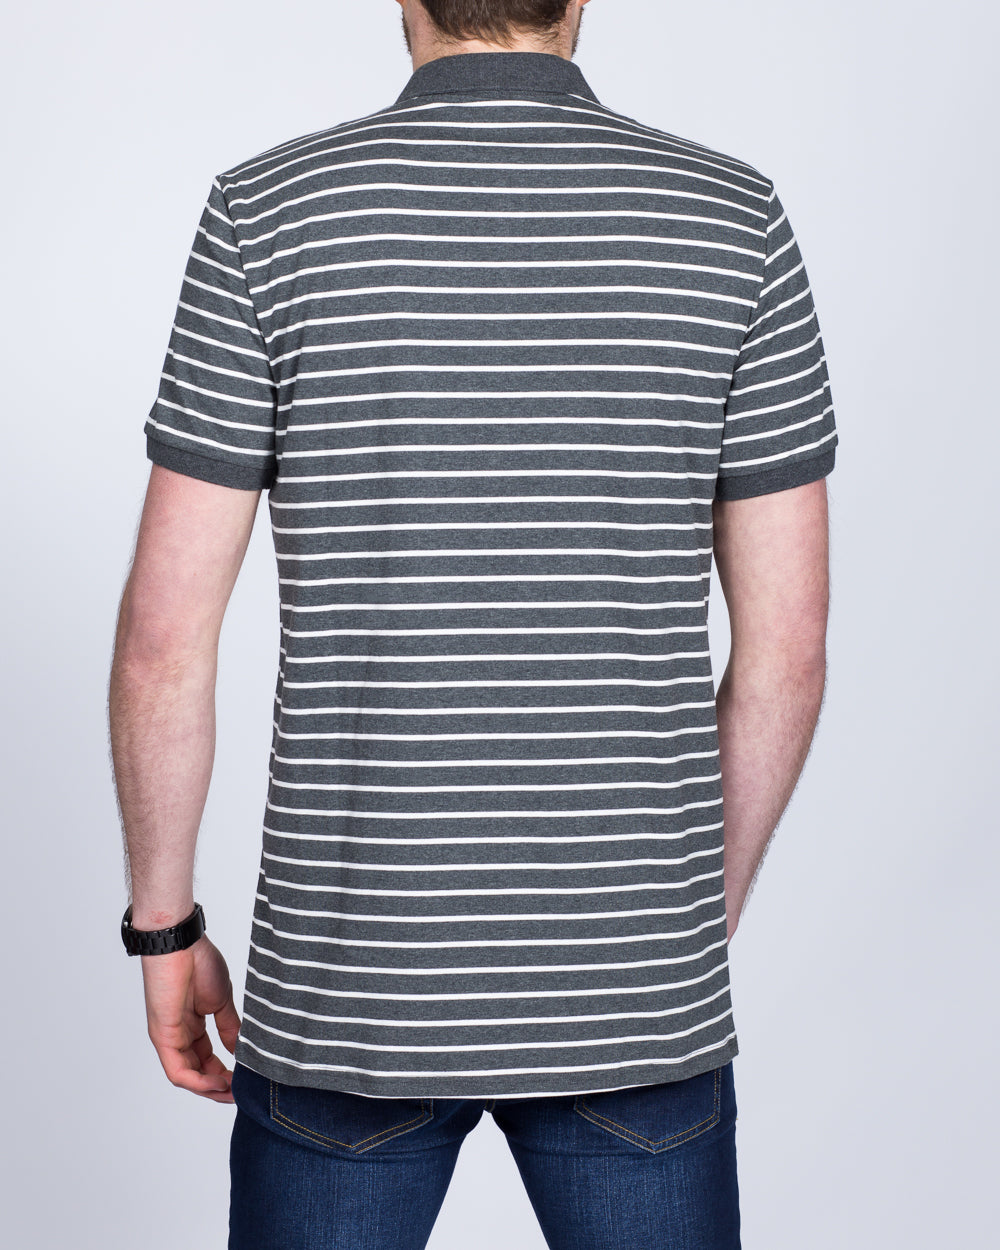 2t Slim Fit Tall Striped Polo Shirt (charcoal)